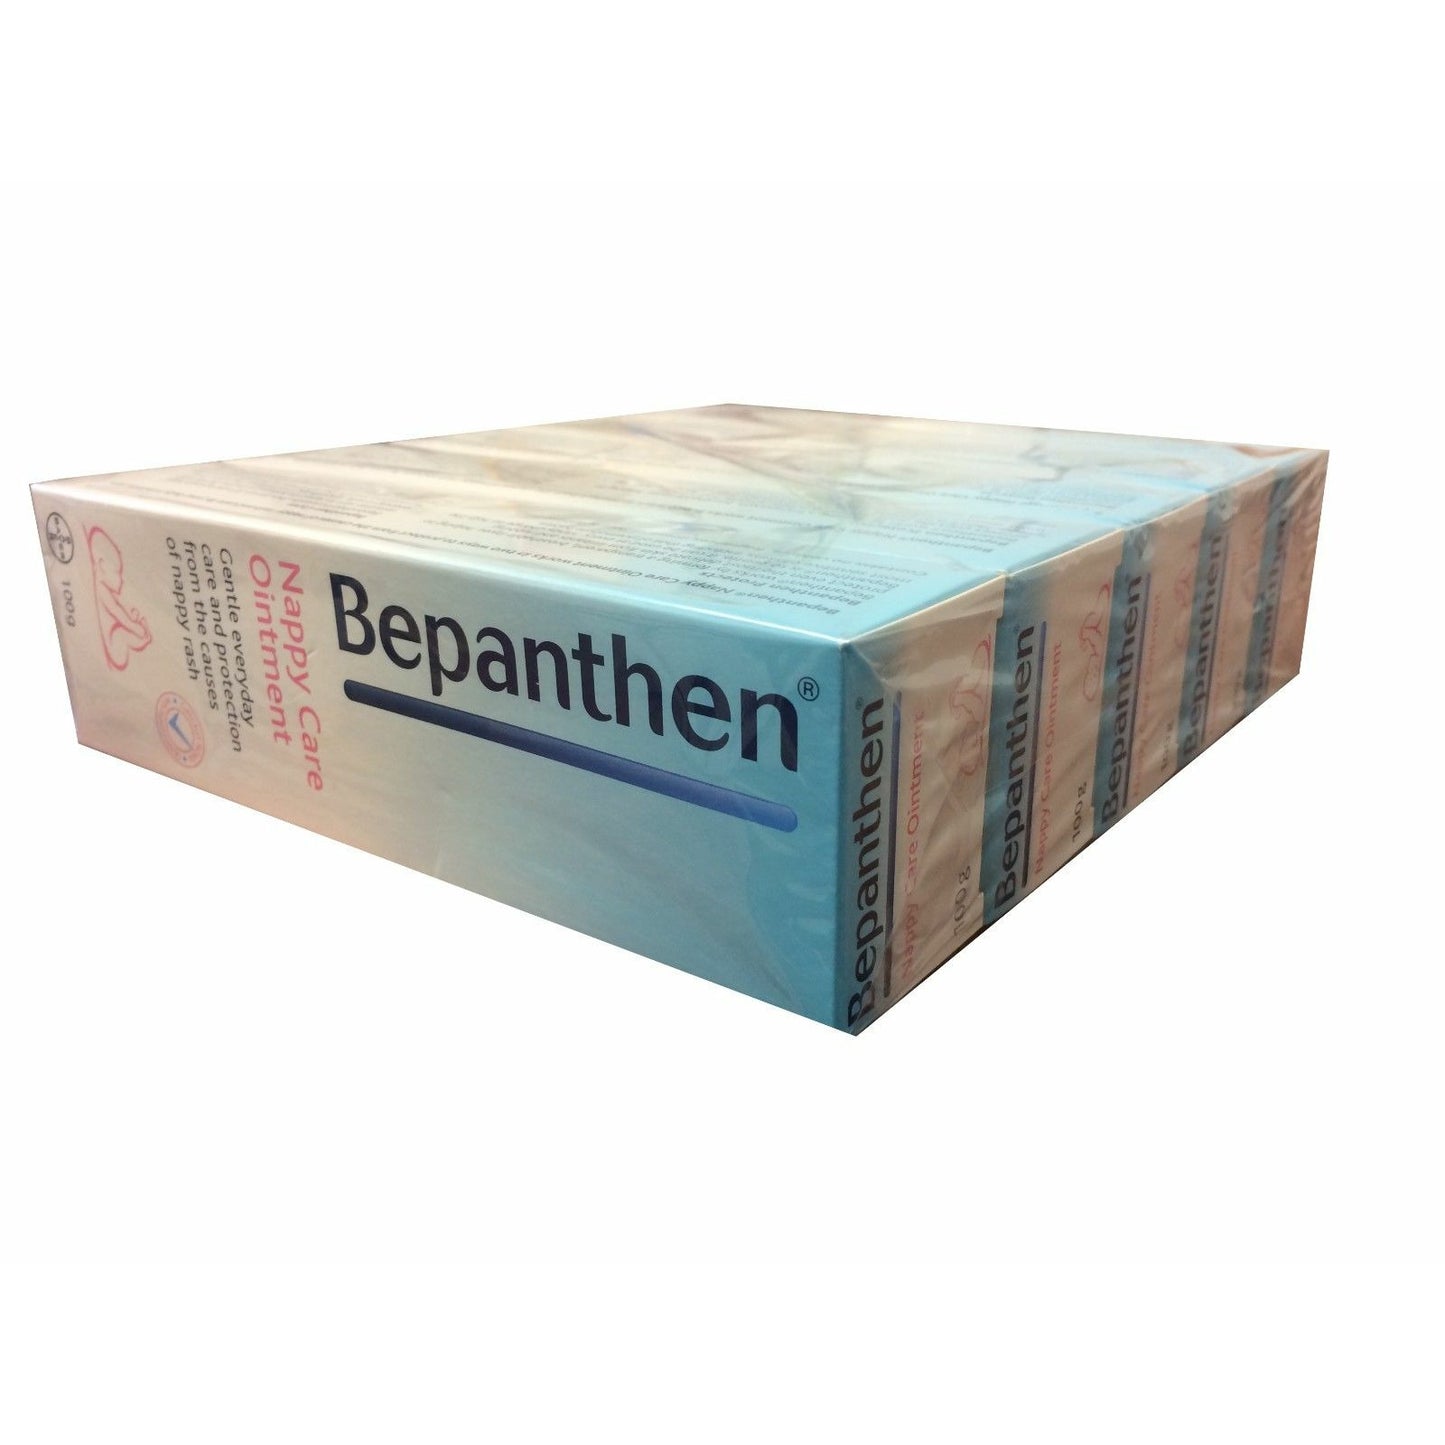 Bepanthen Nappy Care/Tattoo Ointment 100g 5 pack (500g total)